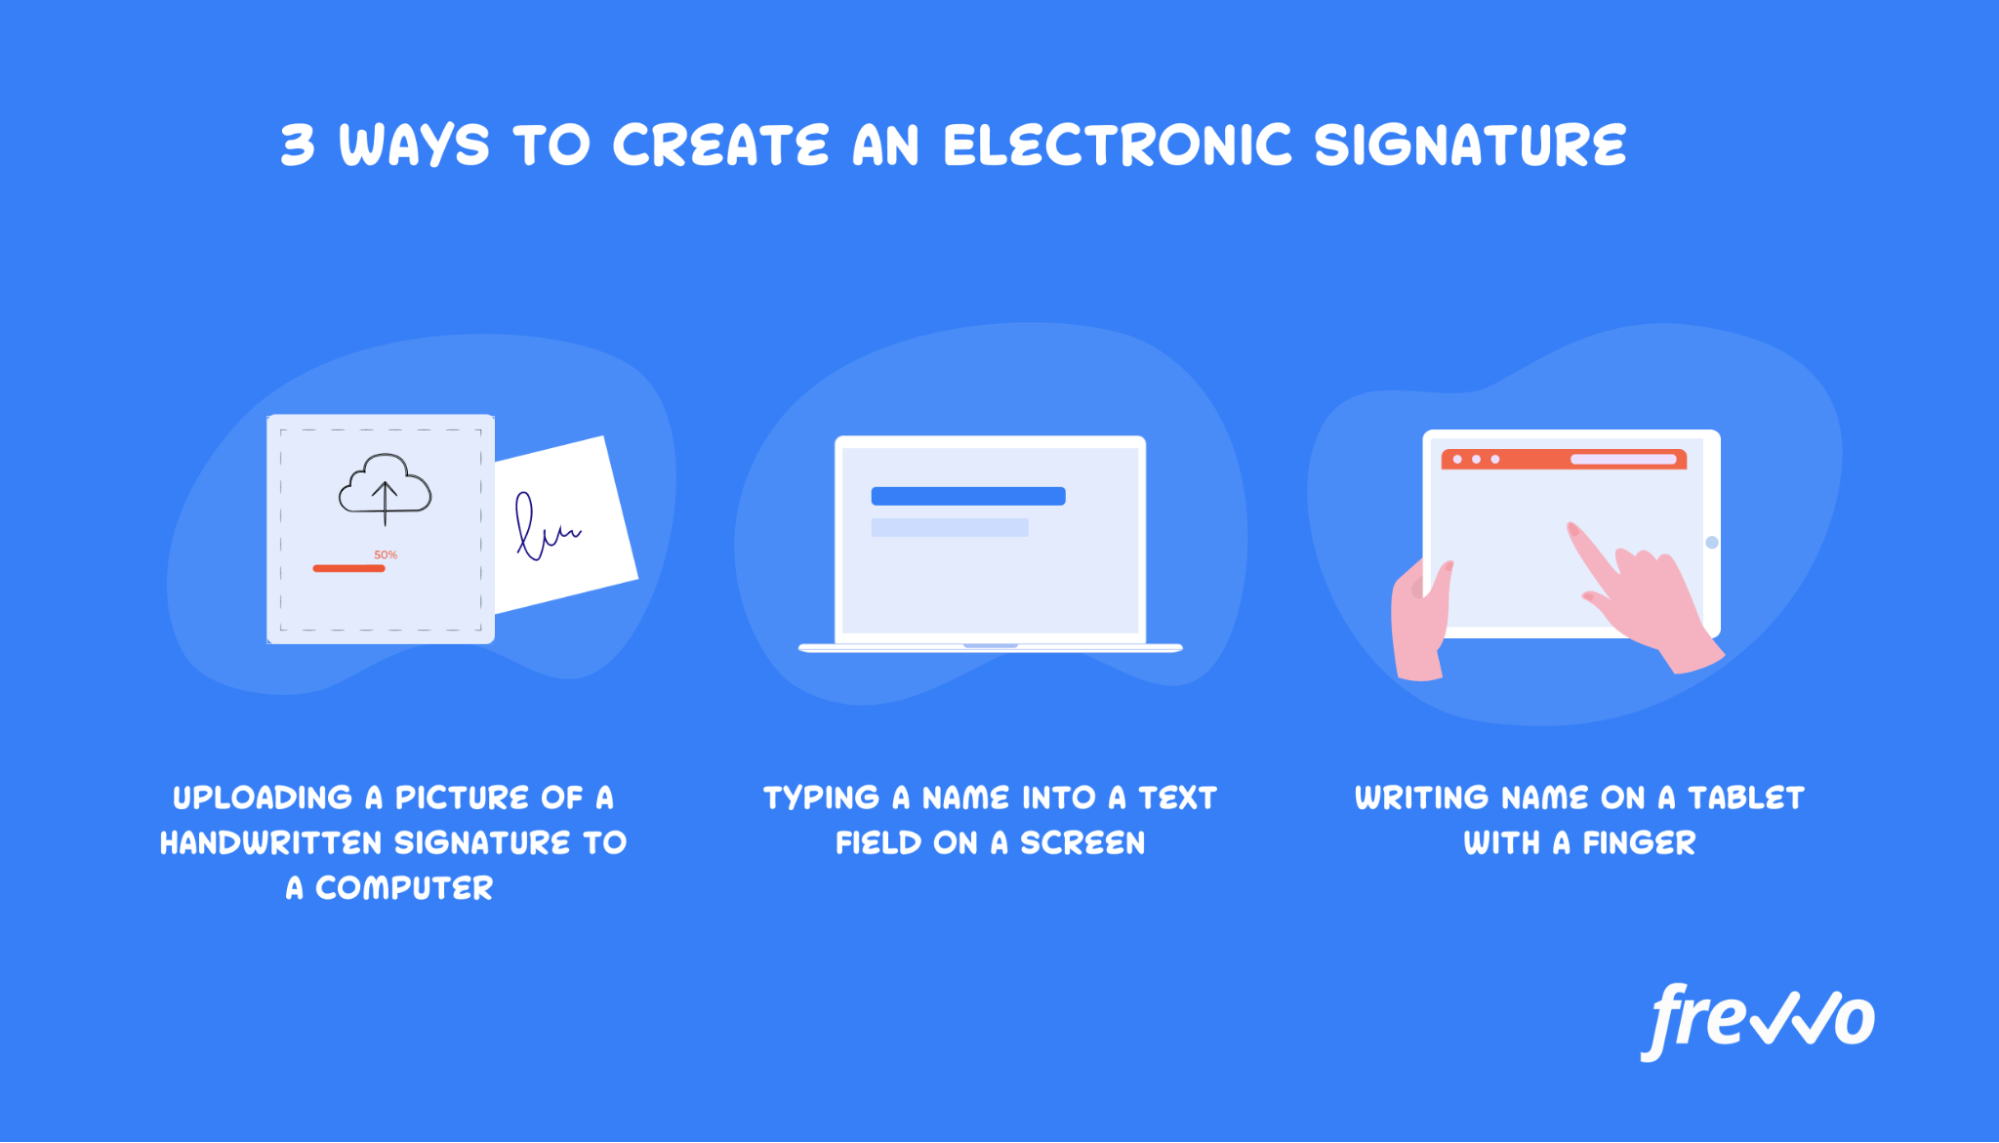 icons showing how to create an electronic signature by uploading a document, typing your name, or drawing with a stylus/finger